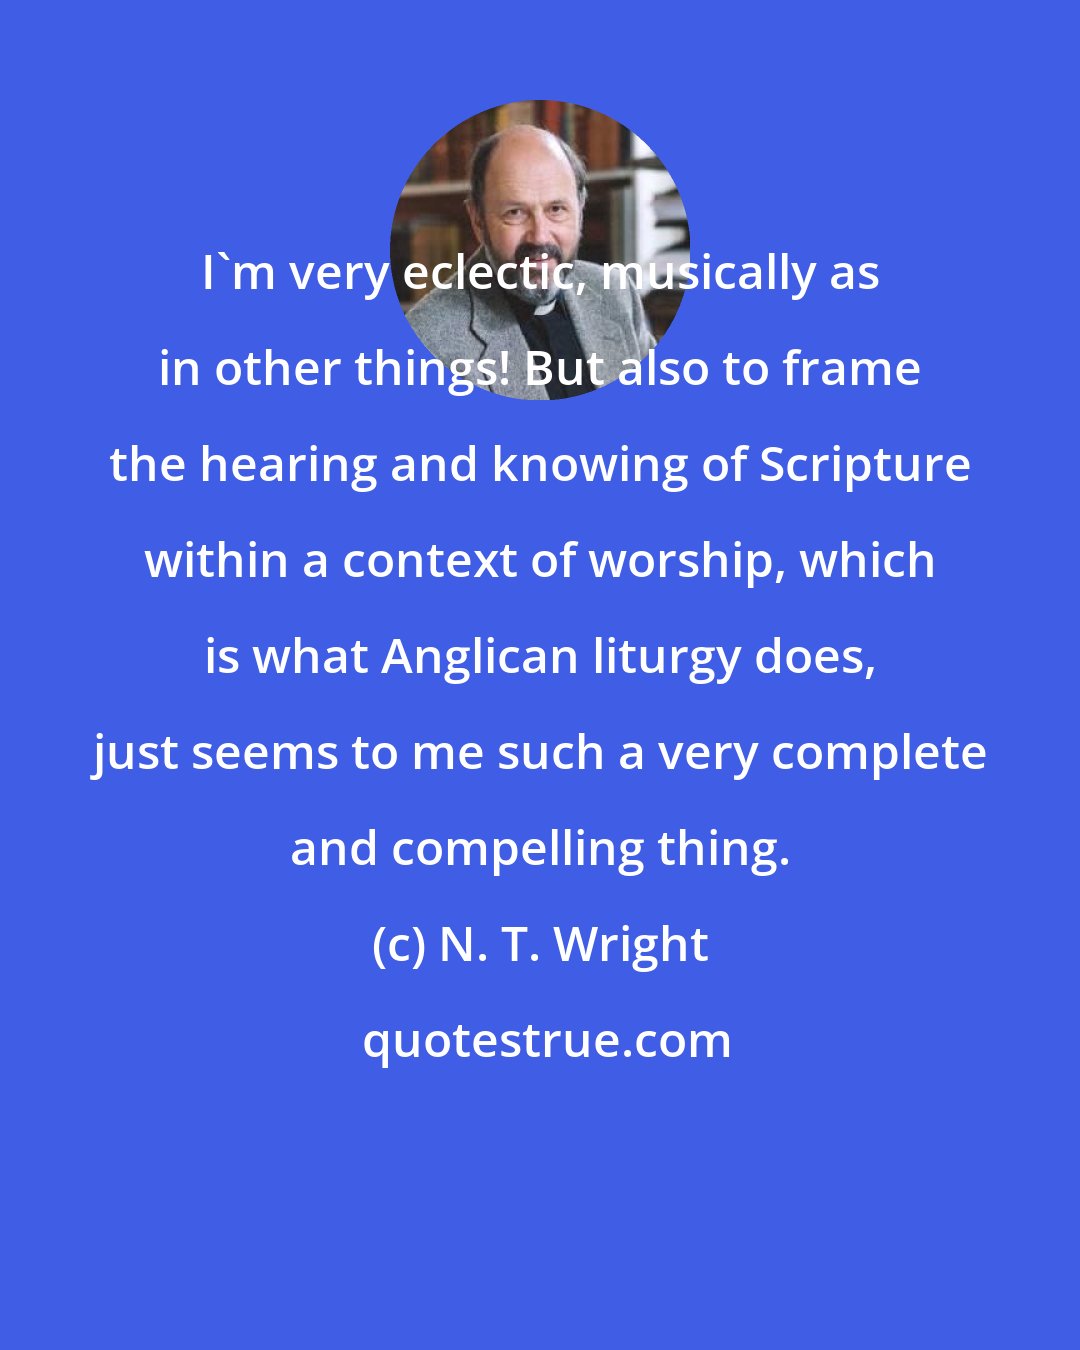 N. T. Wright: I'm very eclectic, musically as in other things! But also to frame the hearing and knowing of Scripture within a context of worship, which is what Anglican liturgy does, just seems to me such a very complete and compelling thing.